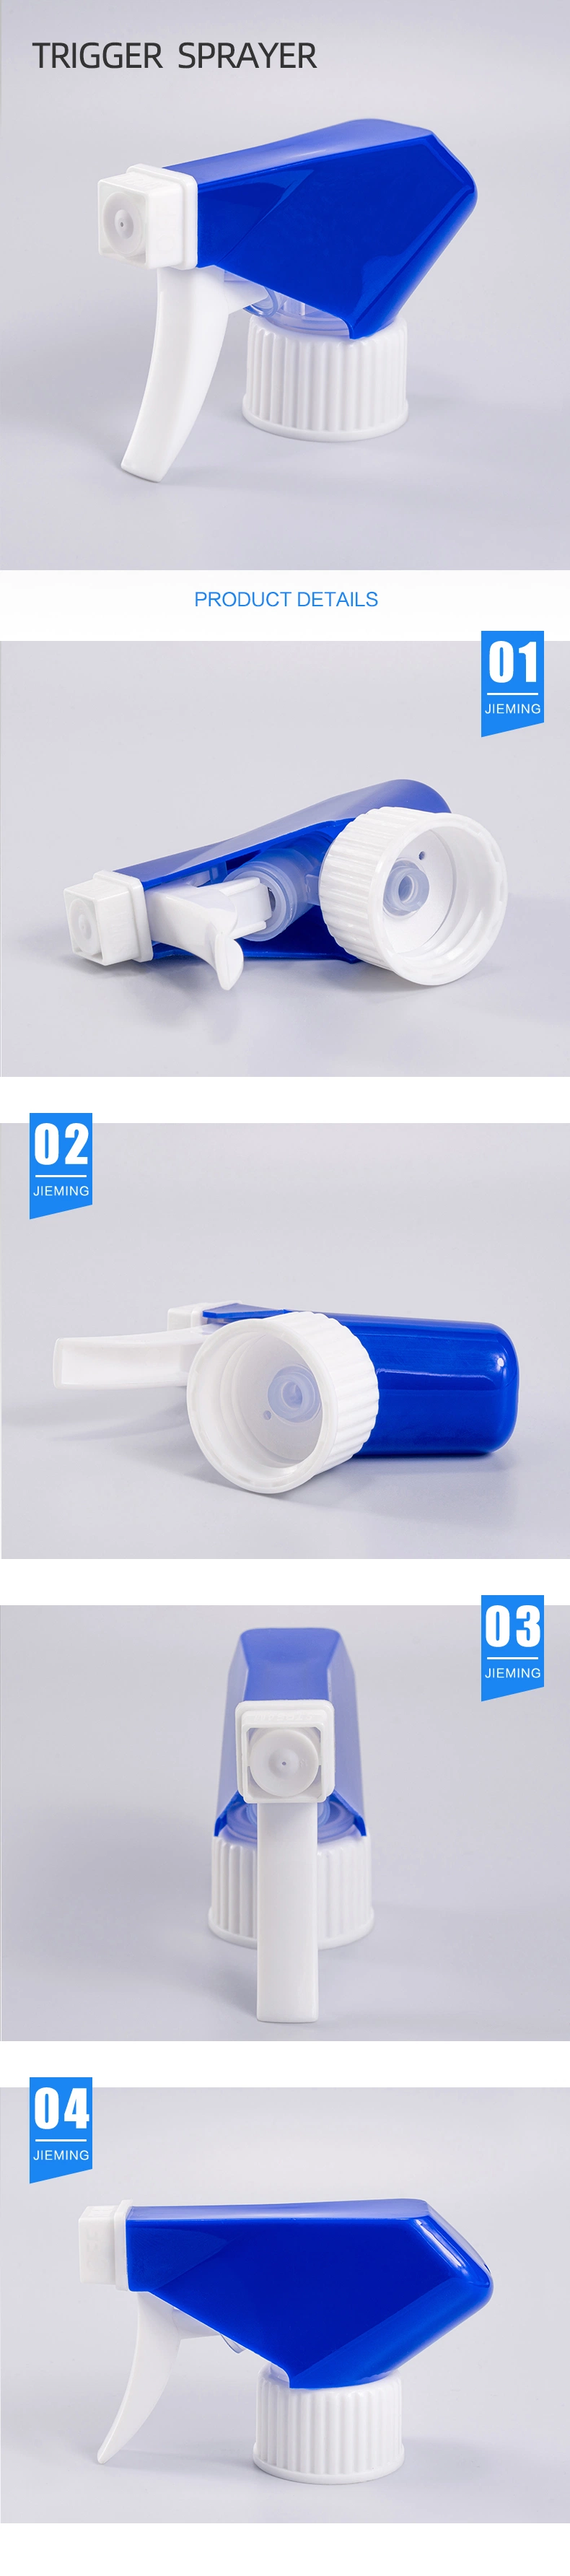 China Factory Plastic Product Trigger Sprayer Liquid Chemical Cleaning Spray Hand Pump for Plastic Bottle Container